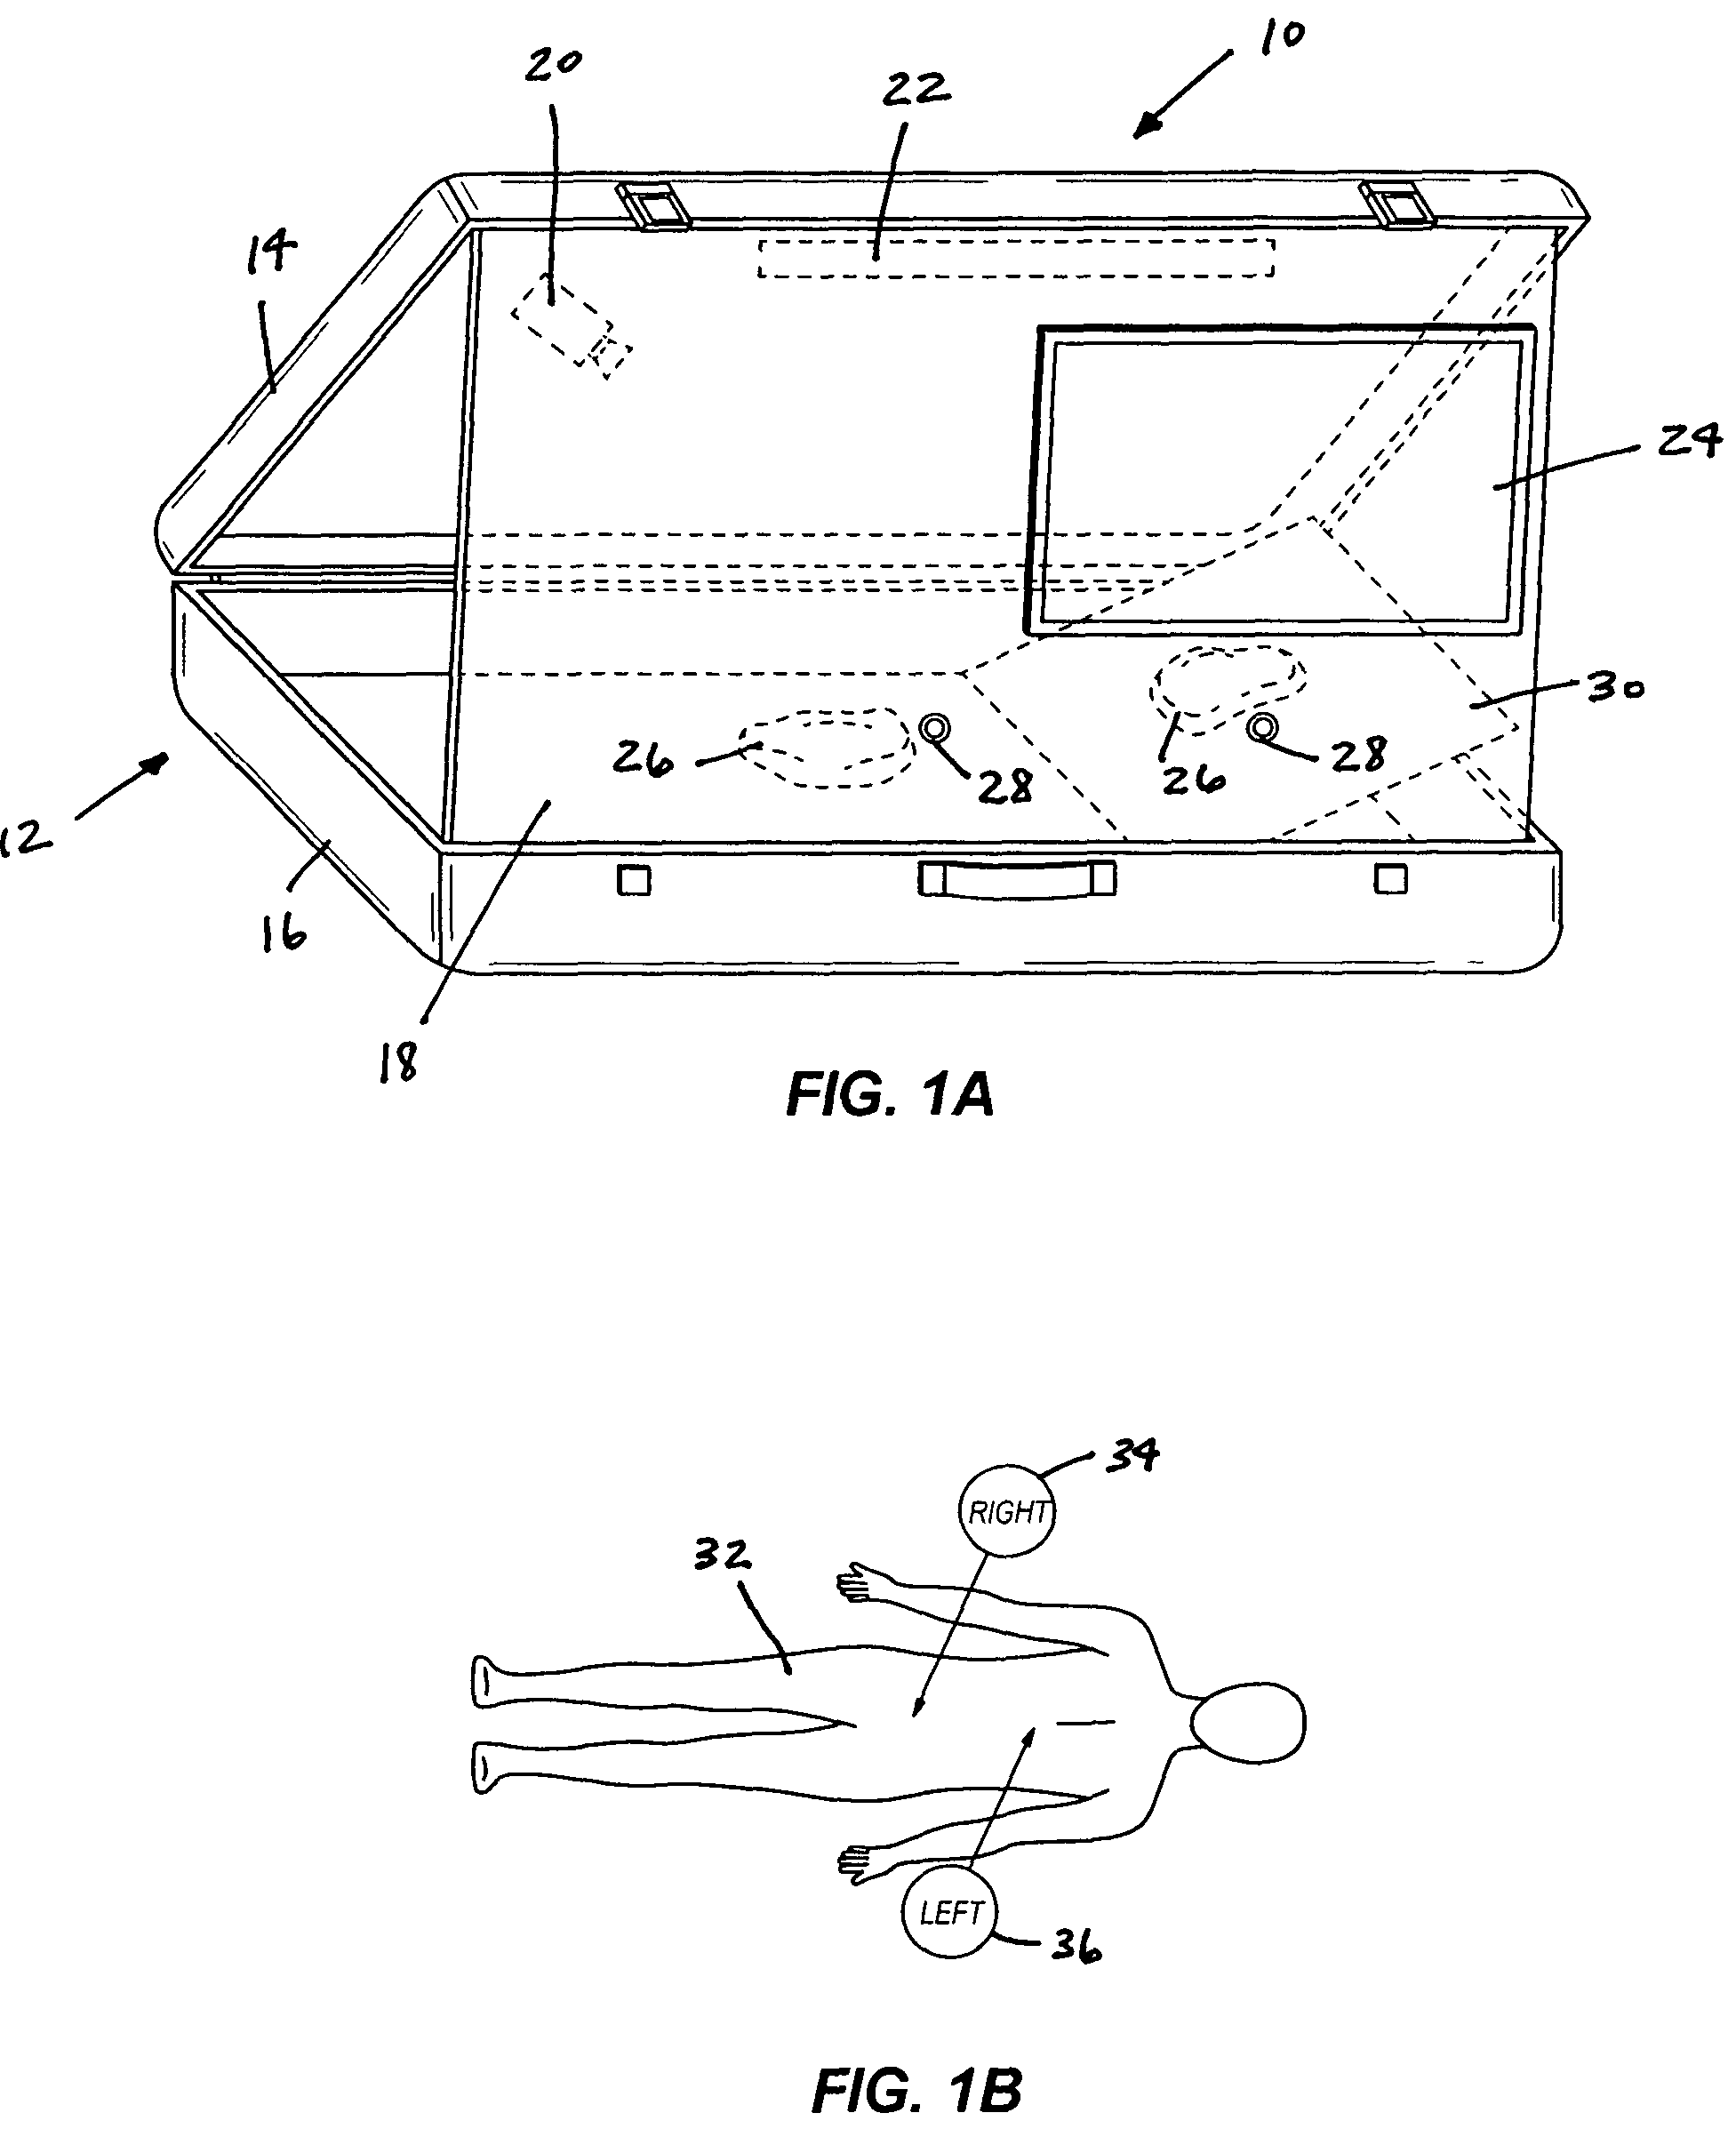 Surgical training device and method